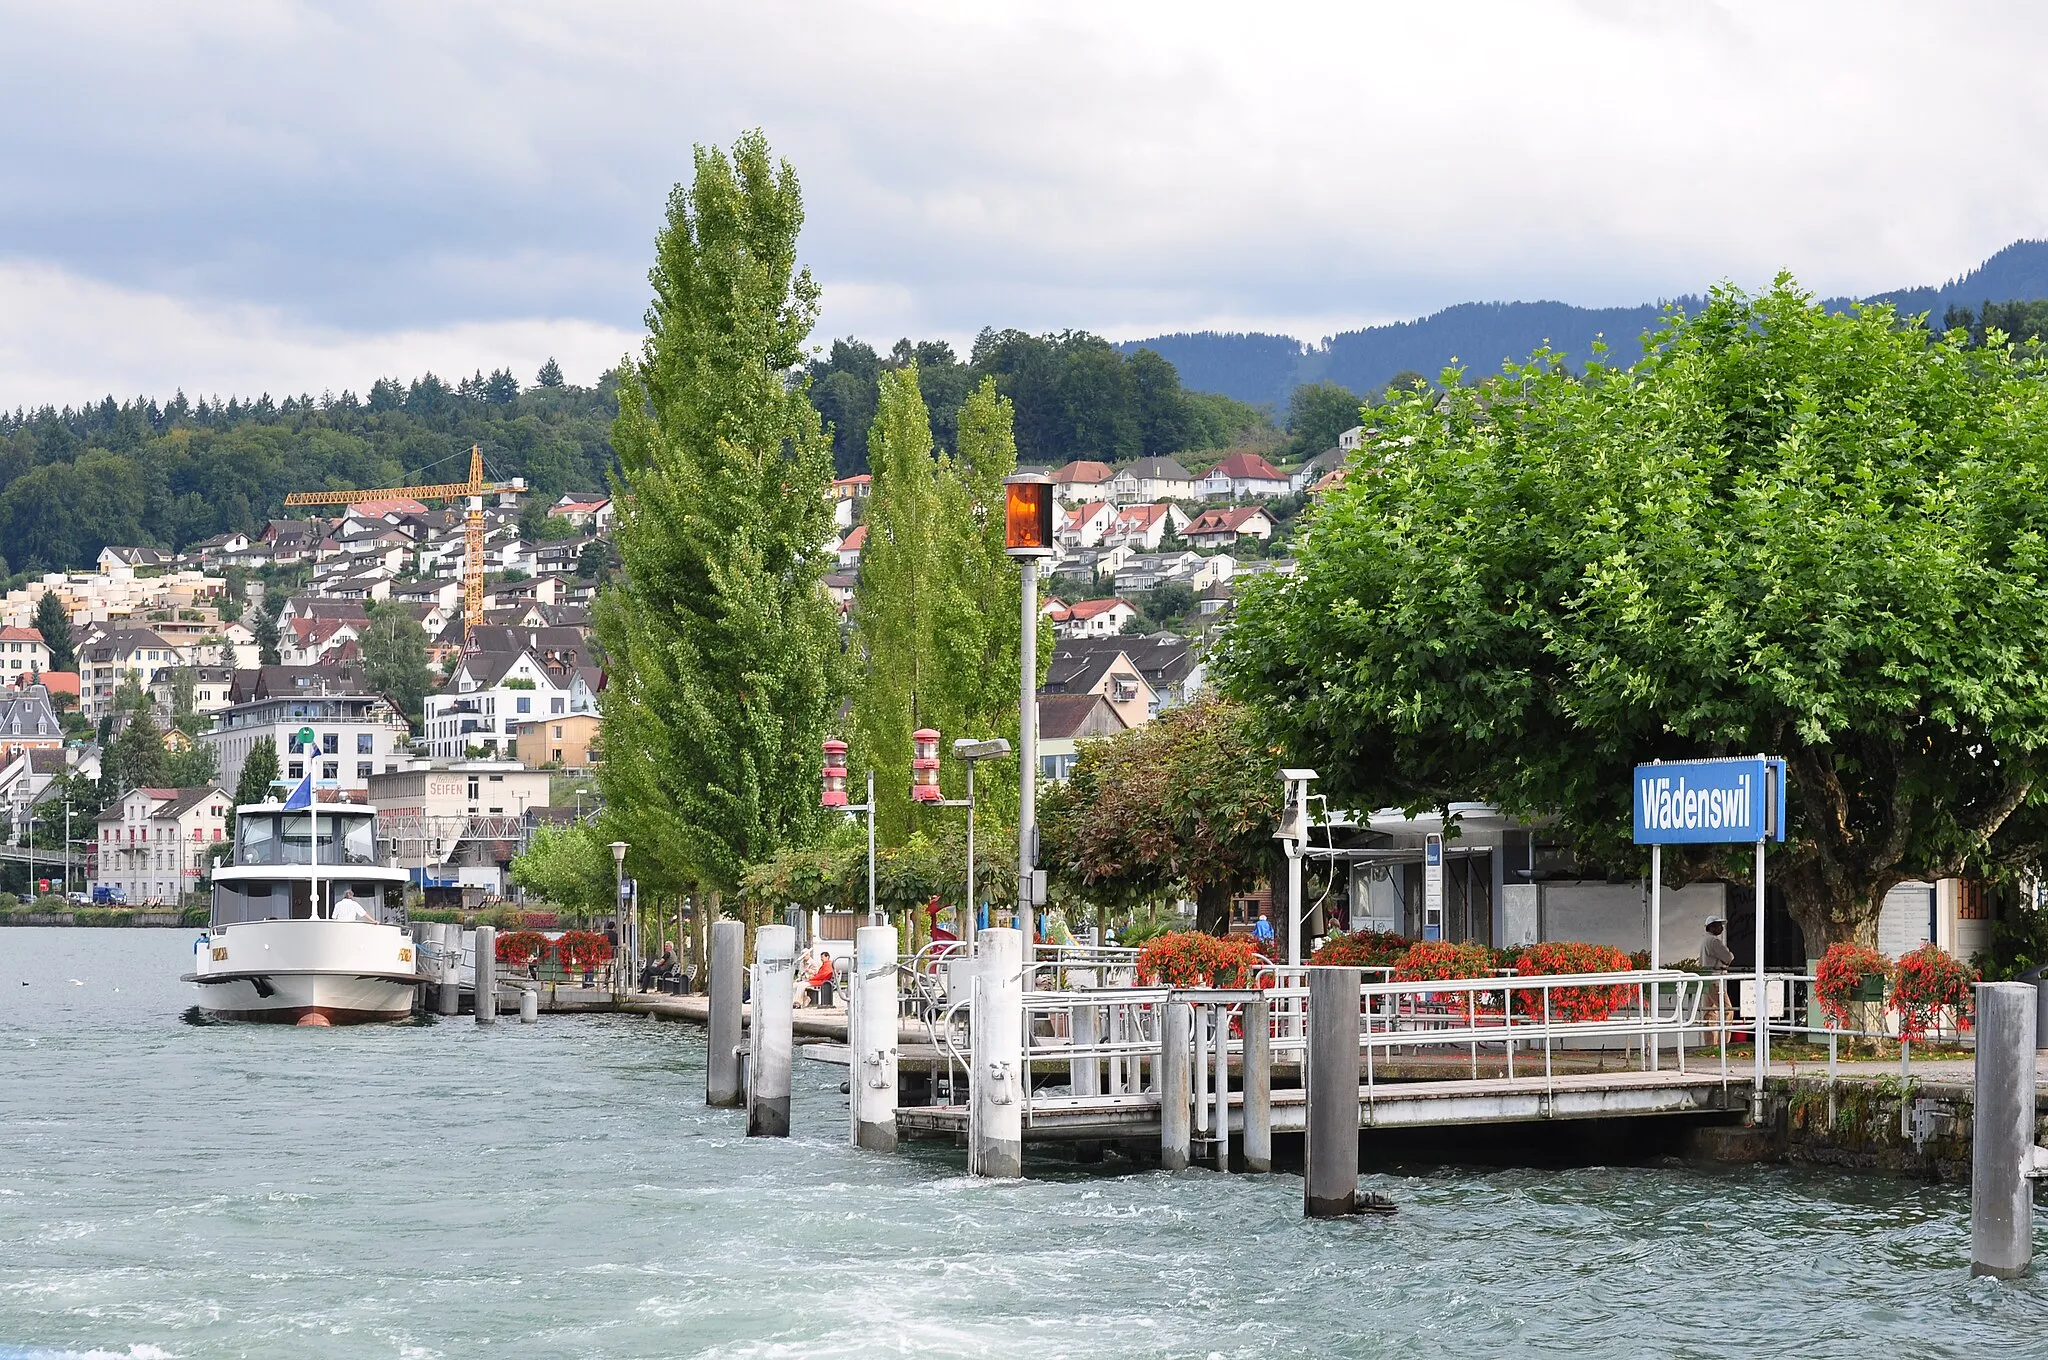 Image of Wädenswil